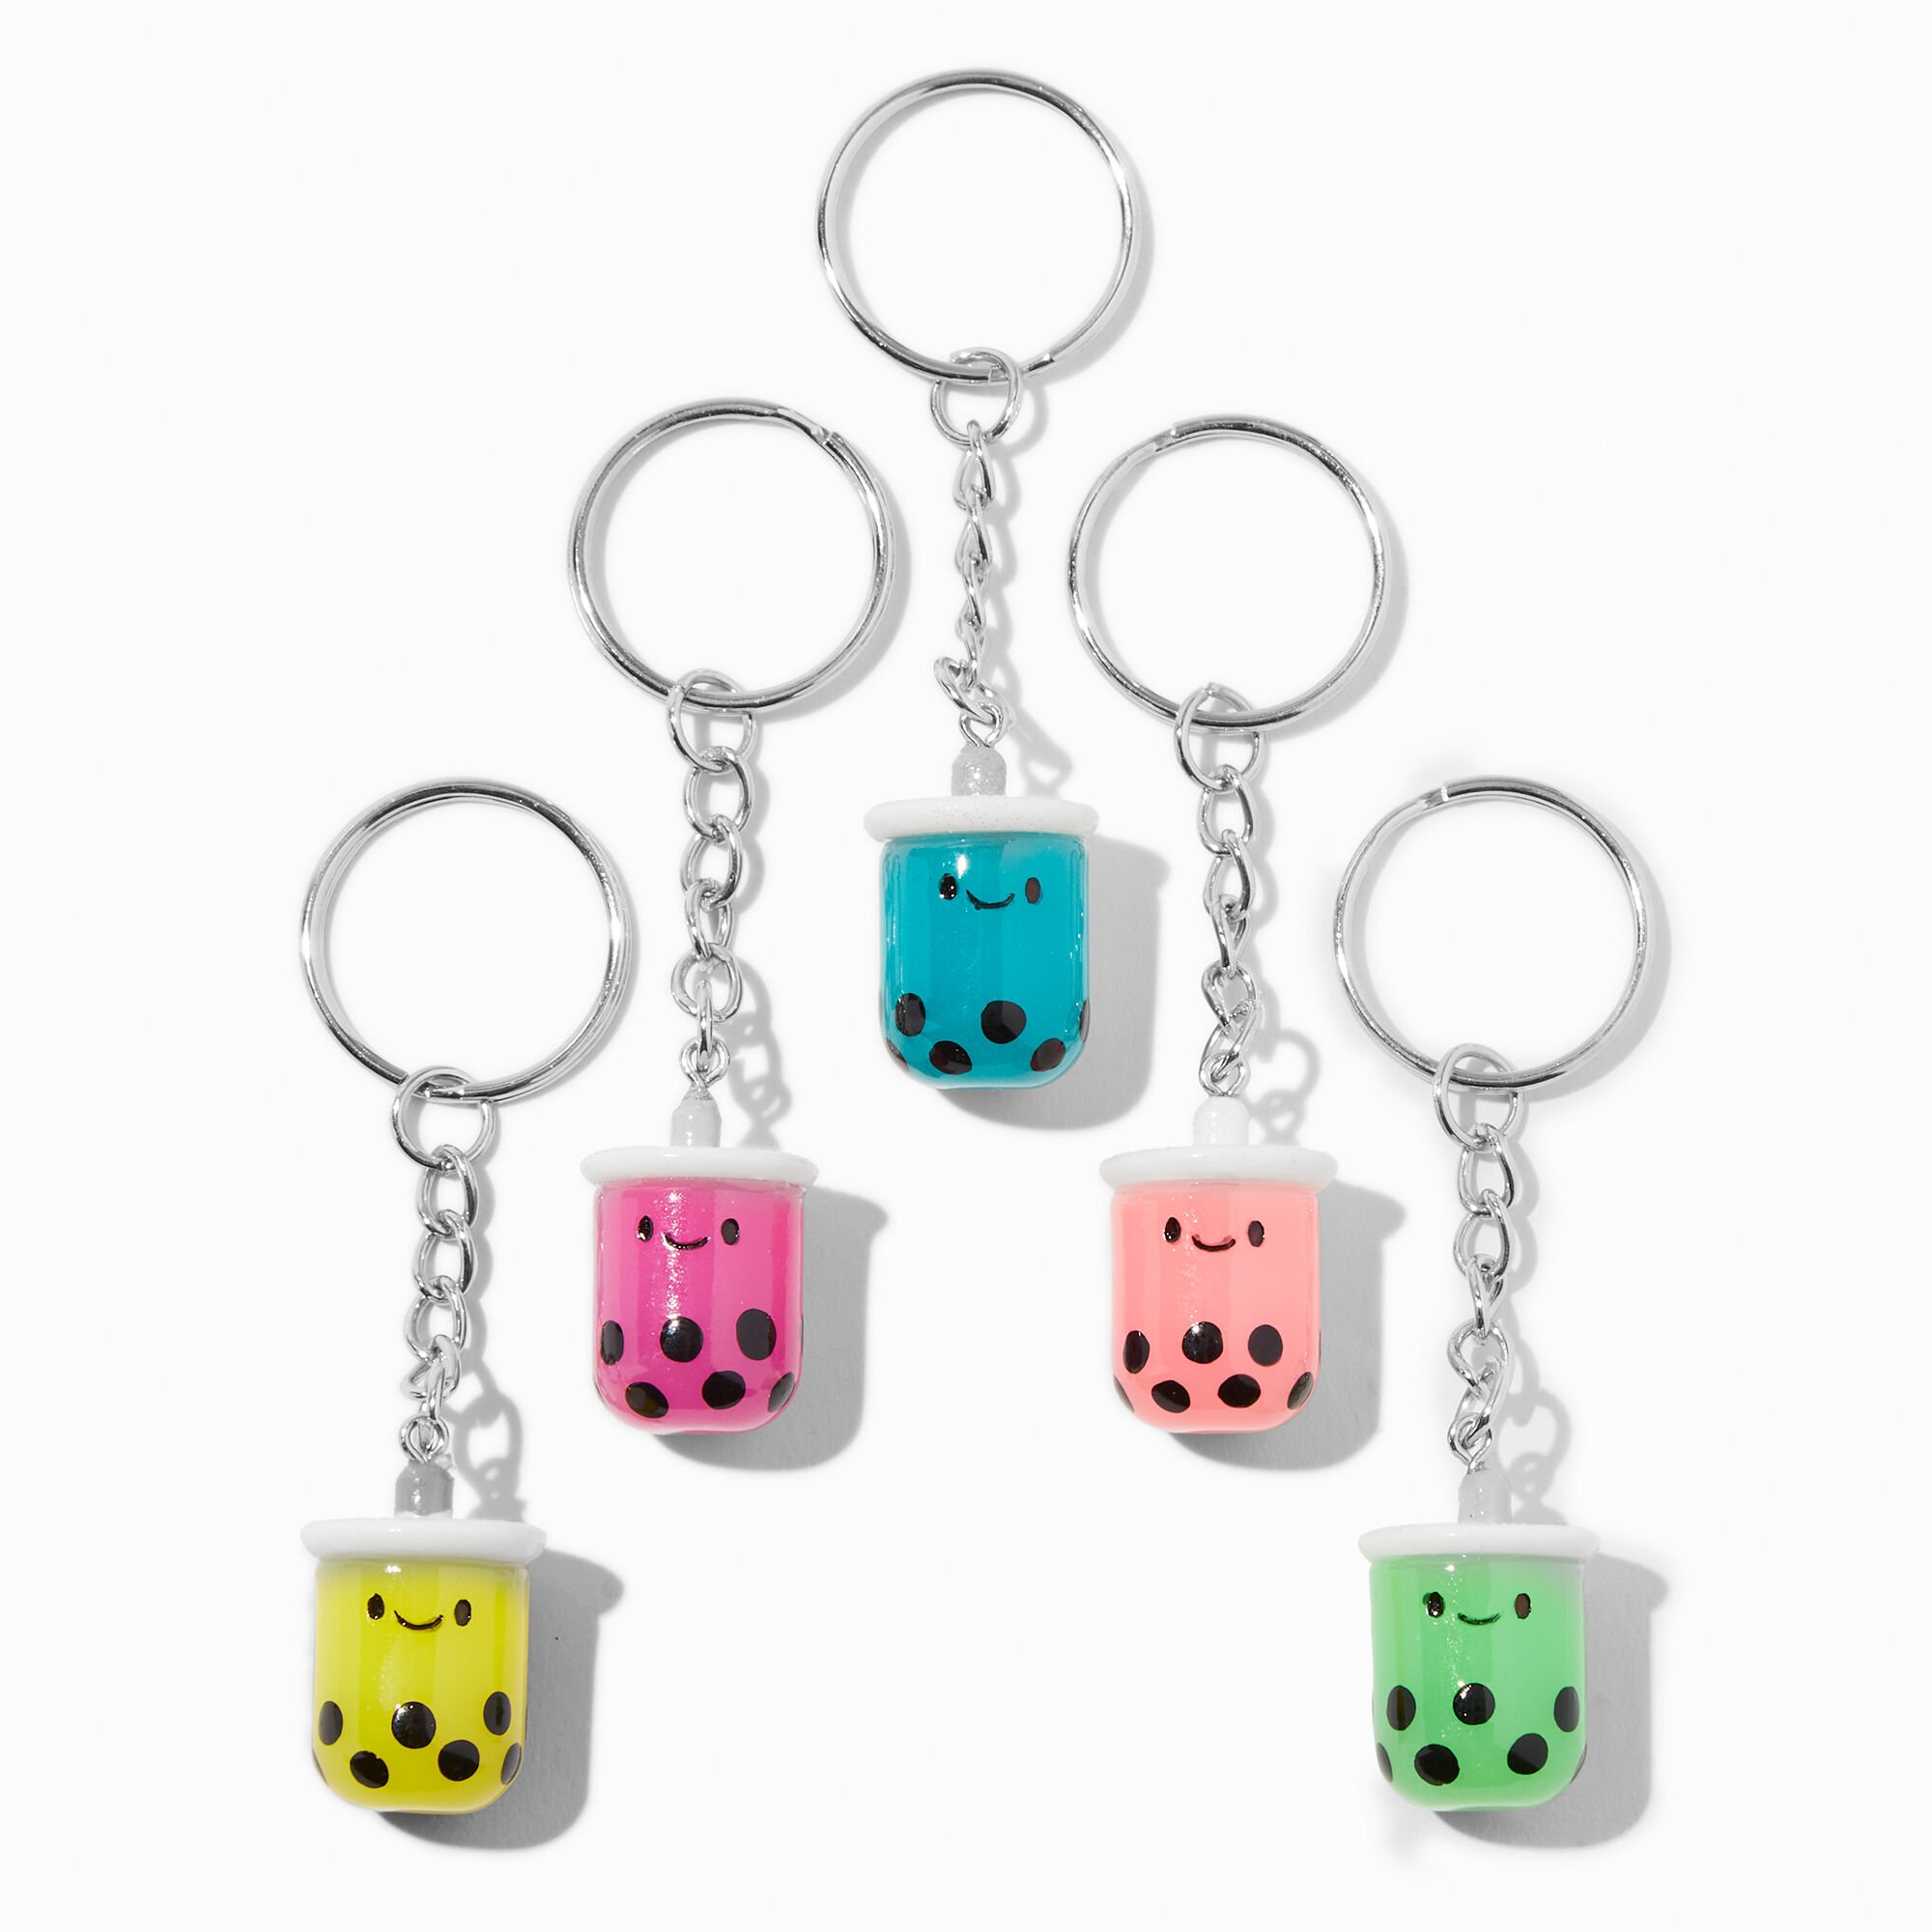 View Claires Boba Tea Best Friends Glow In The Dark Keyrings 5 Pack Silver information